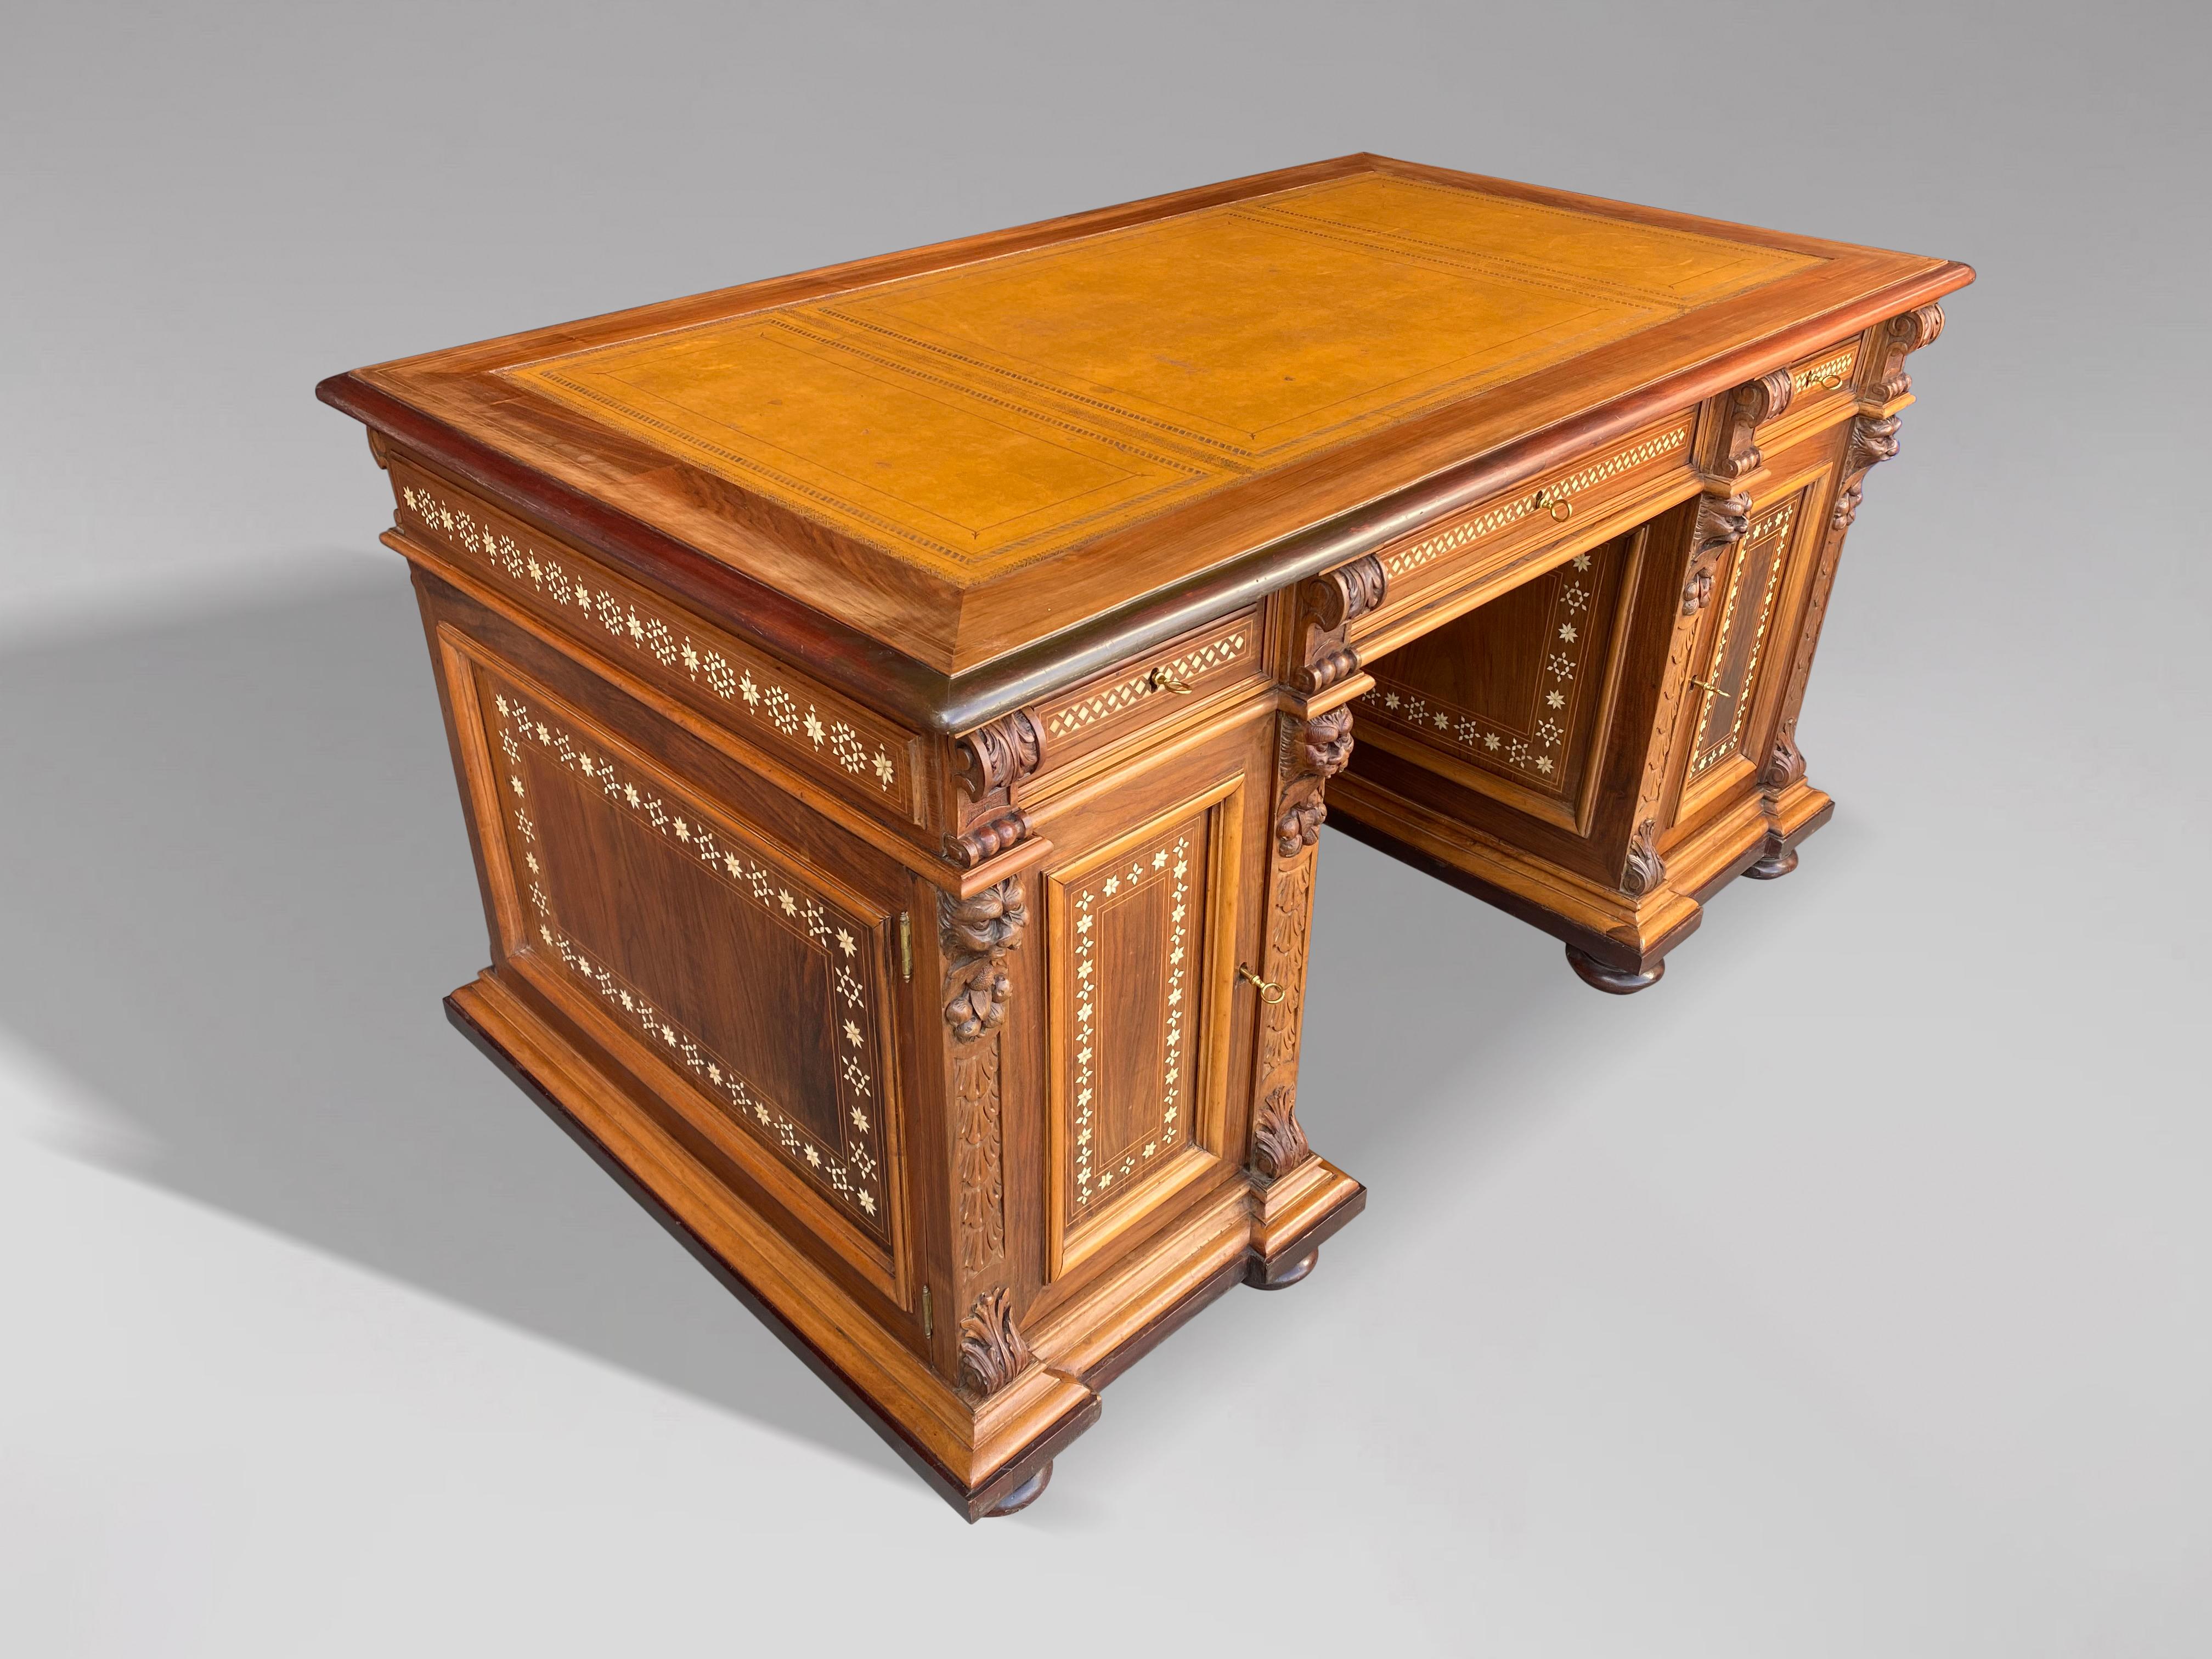 An early 20th Century walnut carved and bone inlay twin pedestal desk. With foliate geometric inlay throughout. The rectangular moulded top with yellow gilt tooled leather above an arrangement of three drawers and two pedestal cupboards, all raised